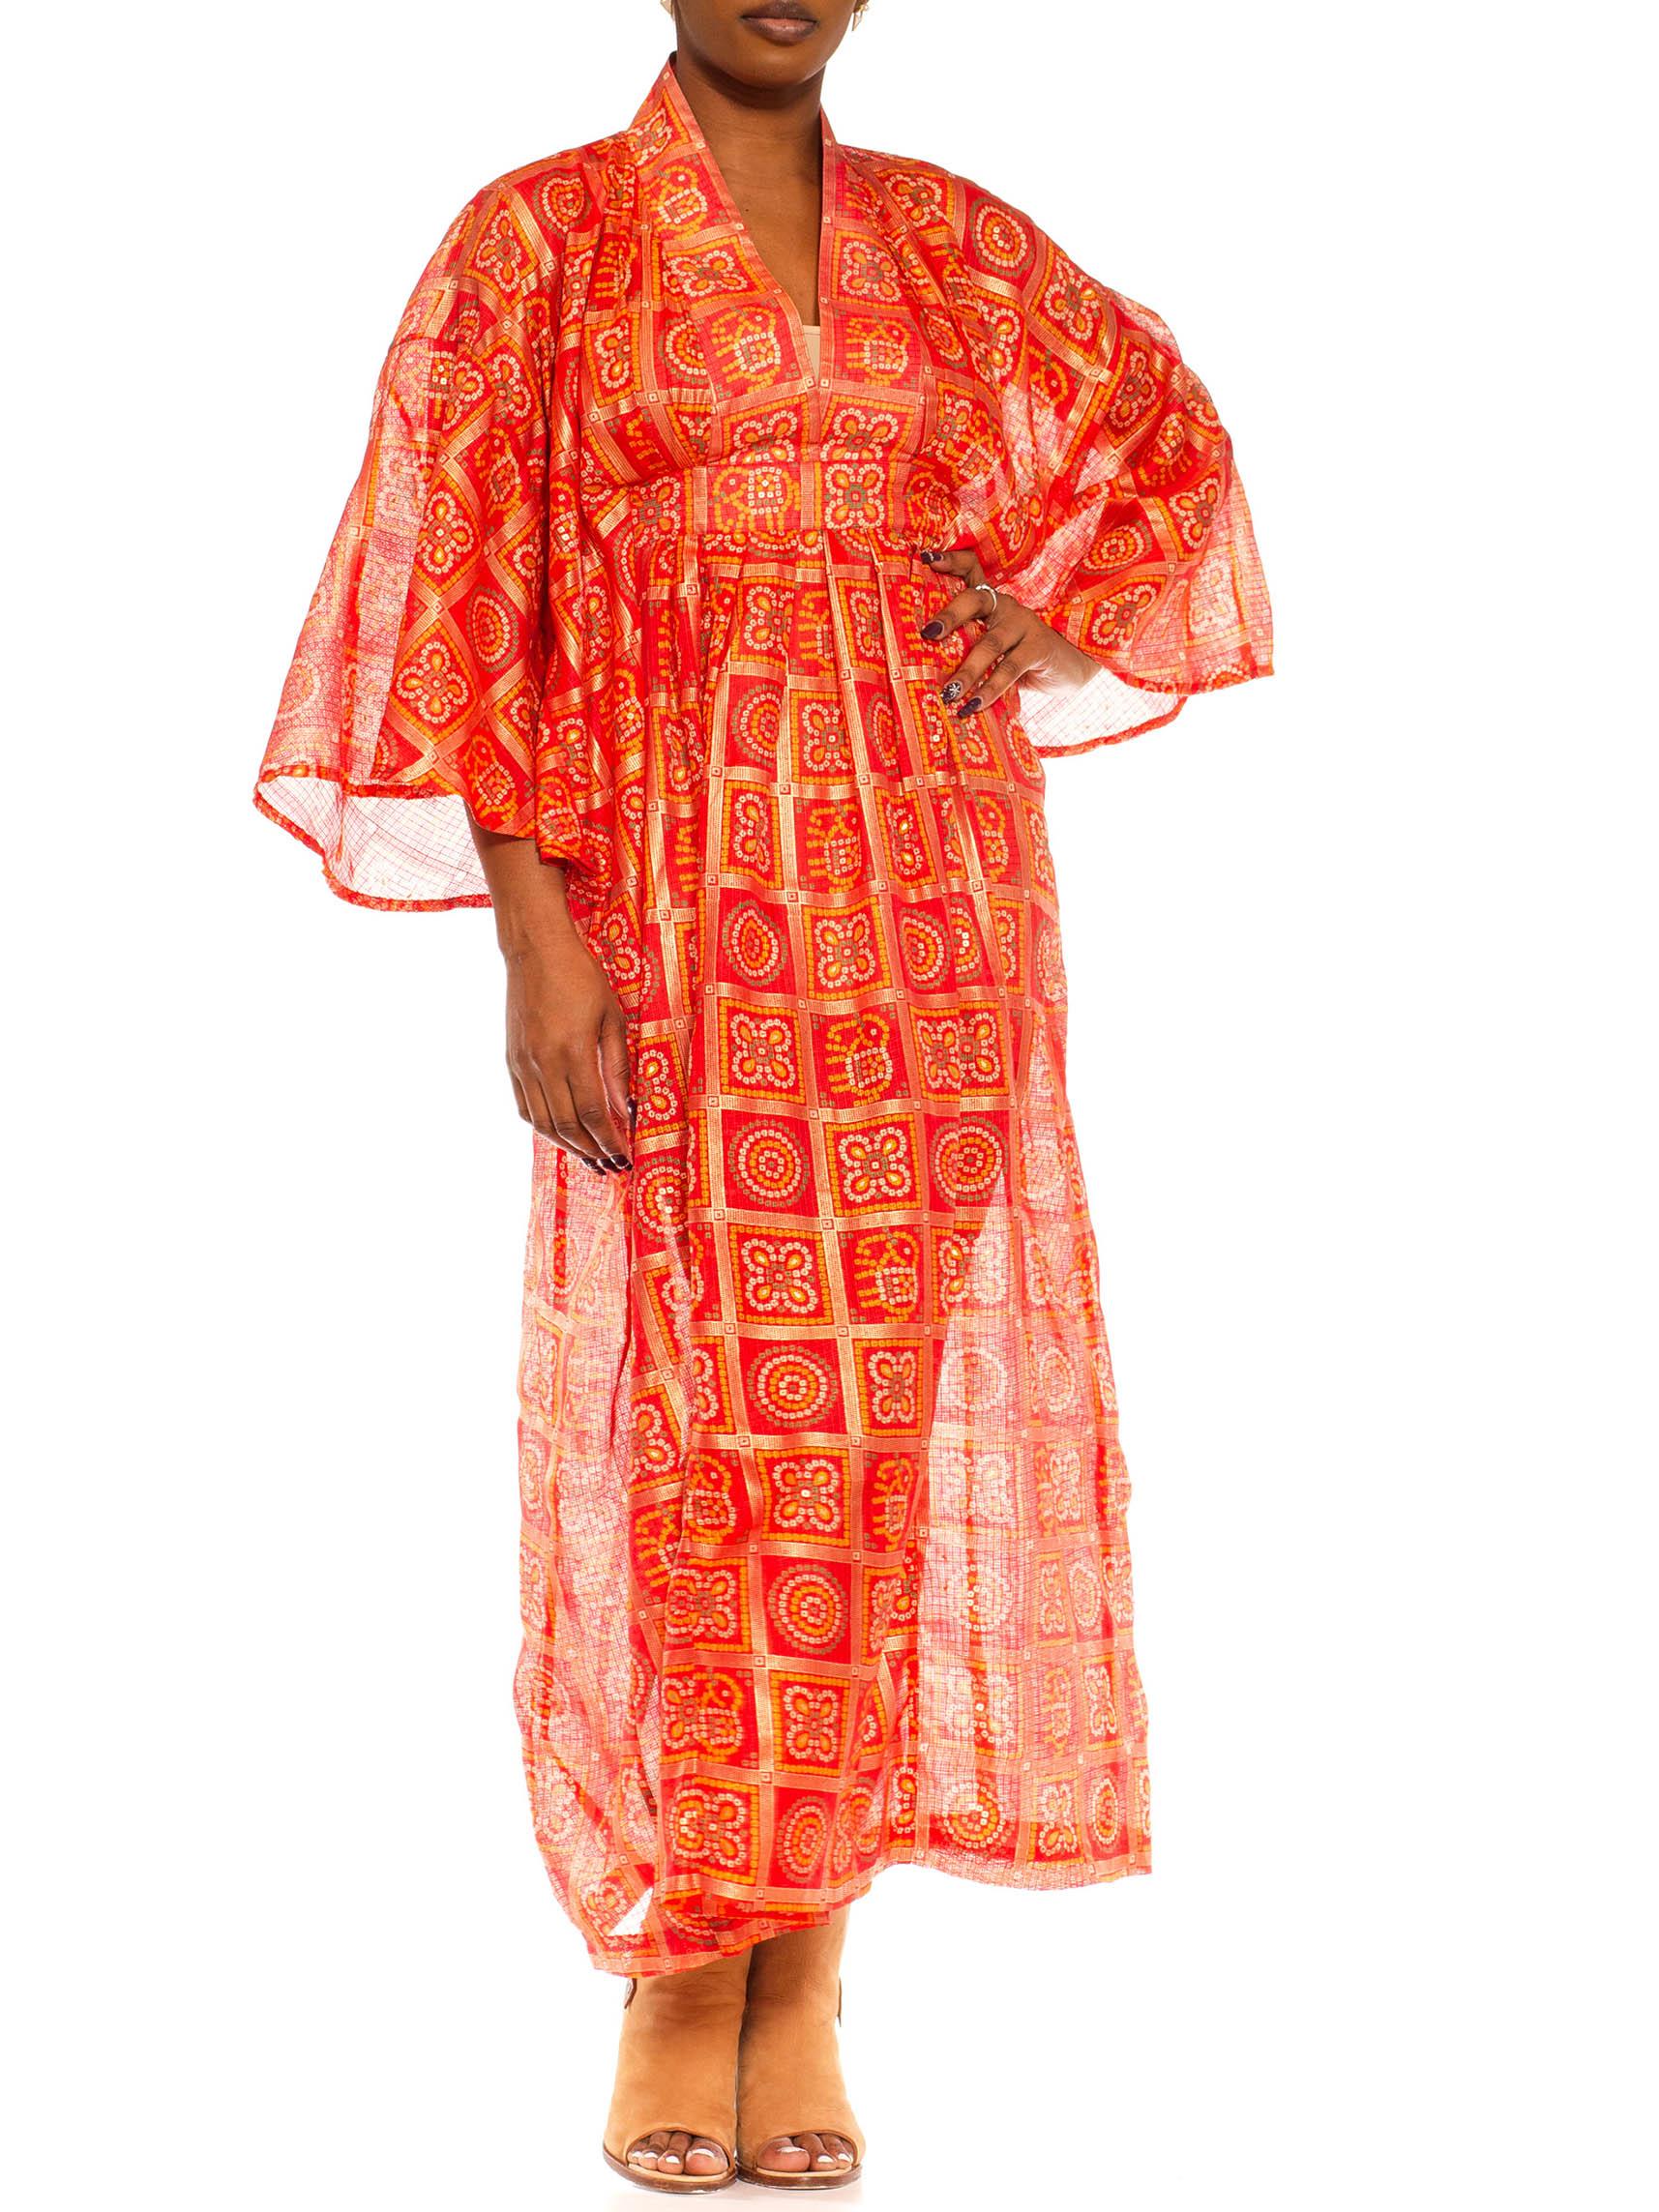 Morphew Collection Red & Gold Polyester Geometric Kaftan Made From Vintage Saris For Sale 3